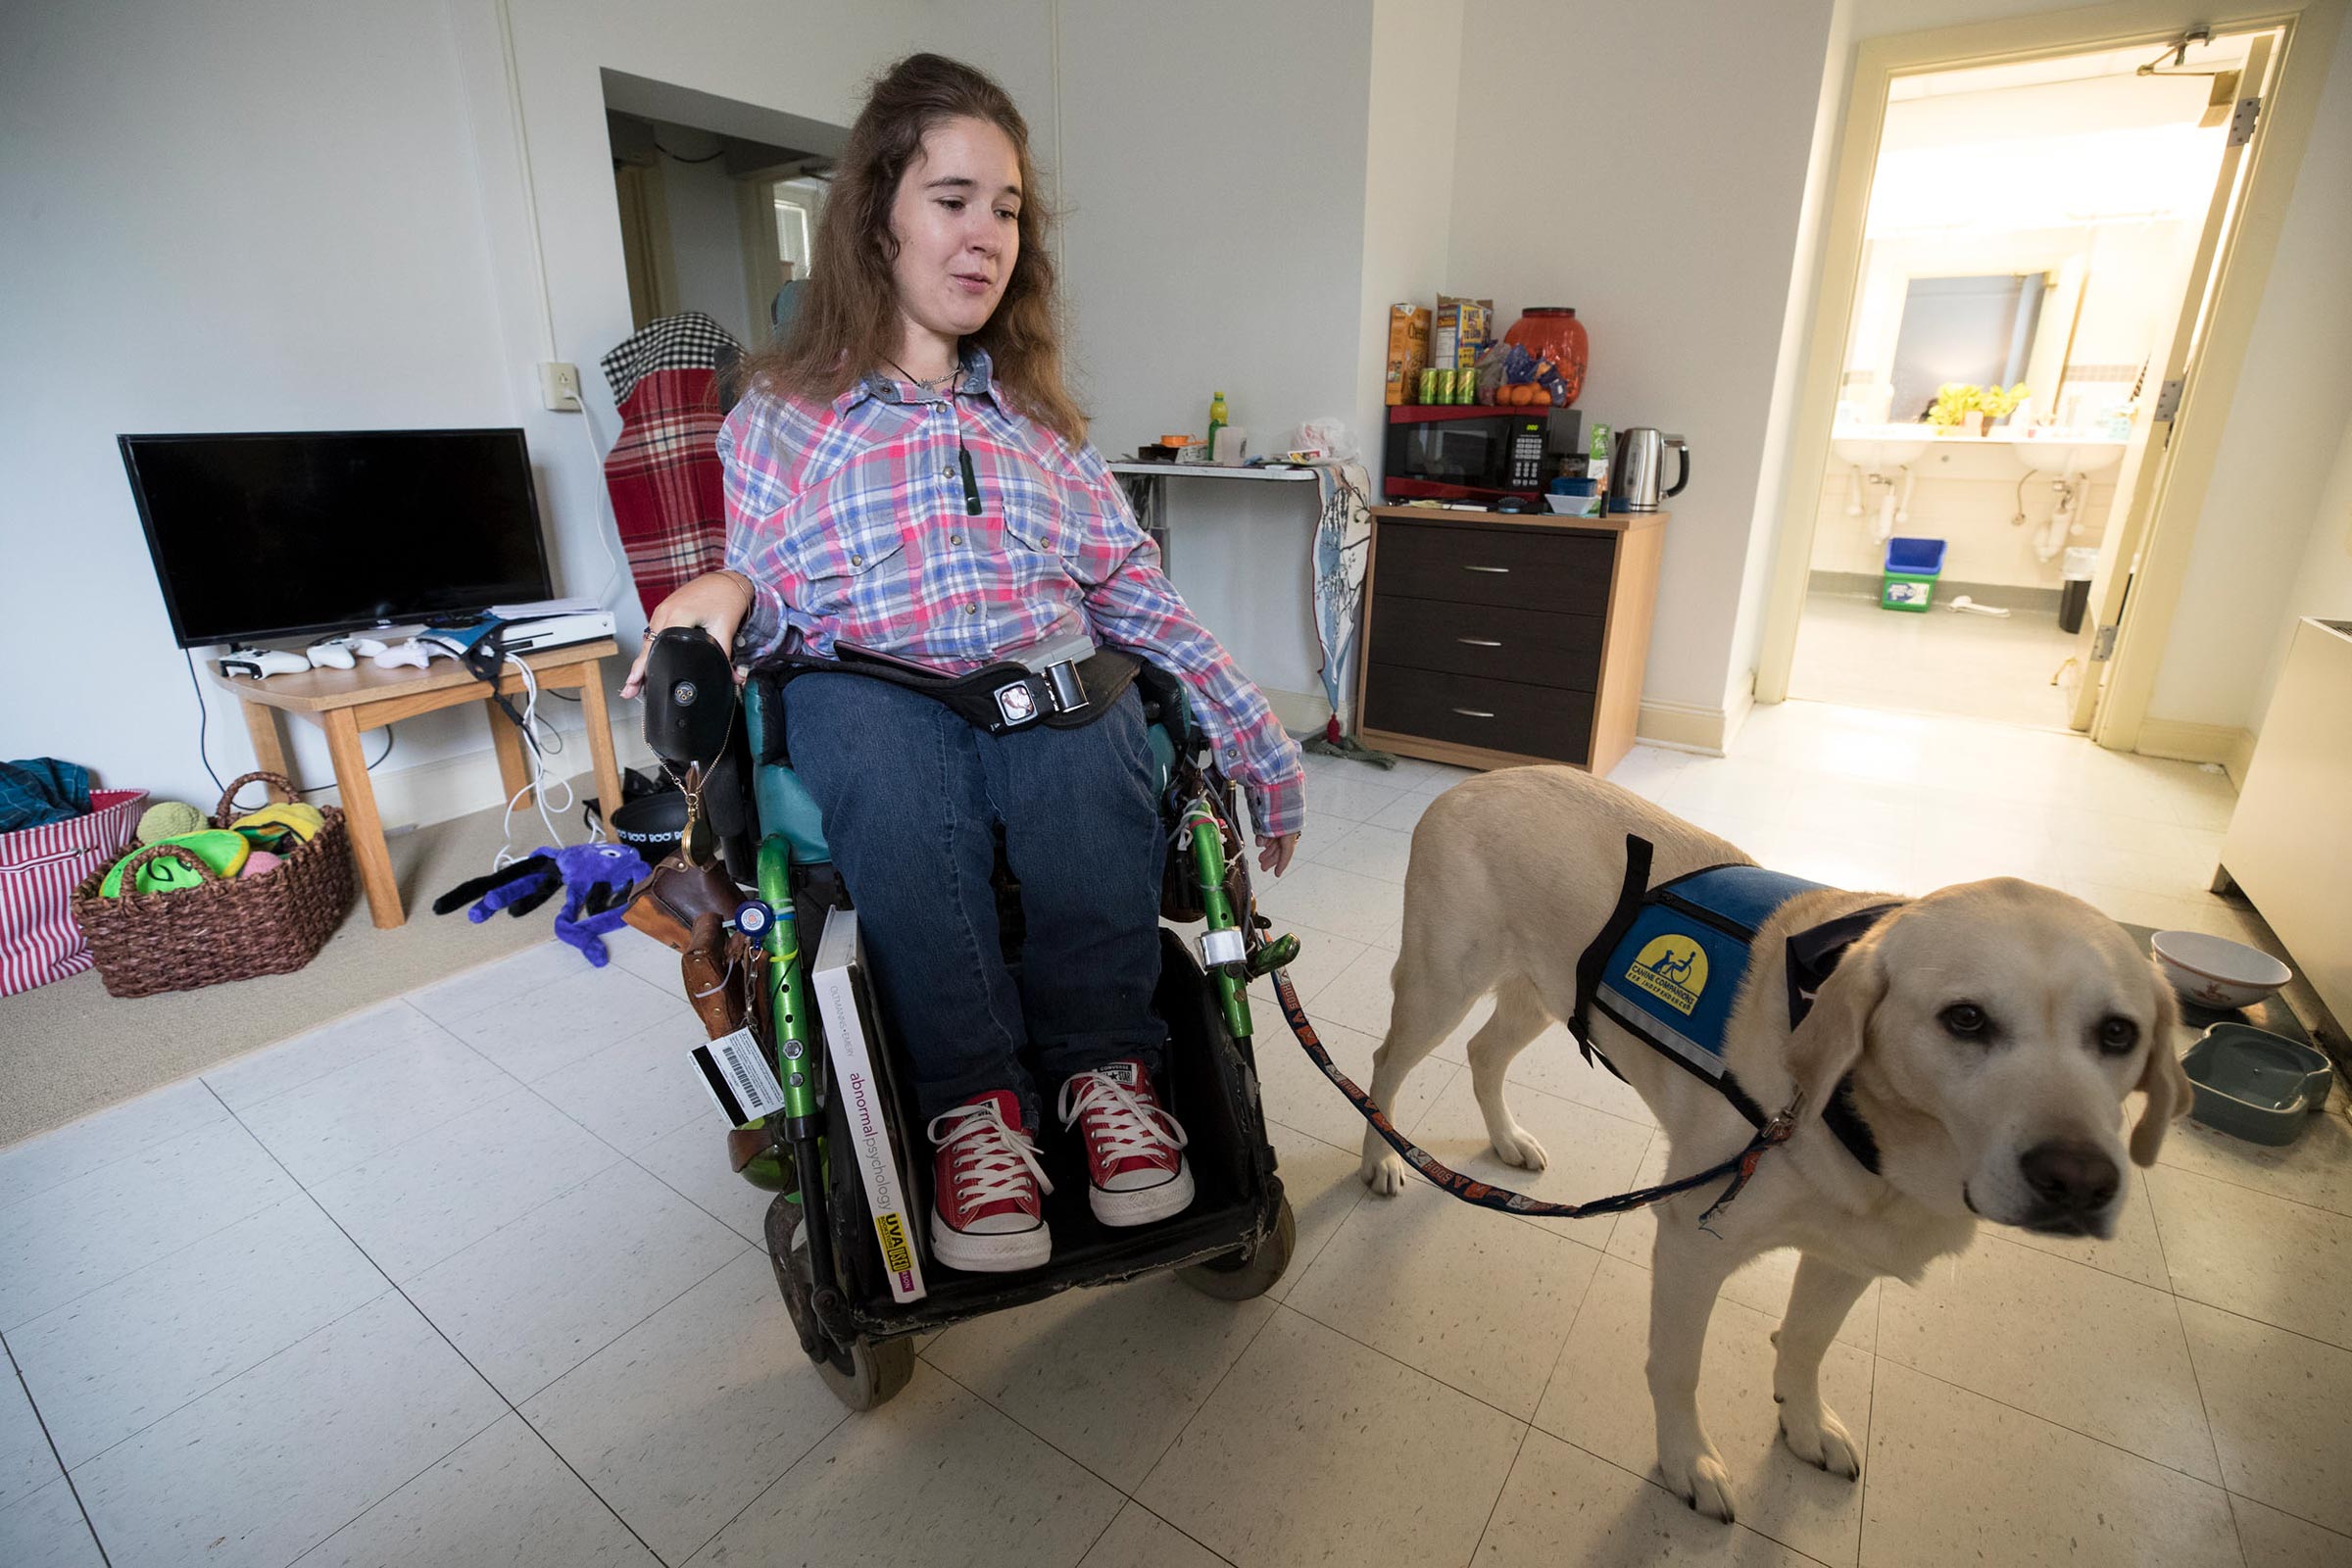 Shea Megale and her service dog in their apartment